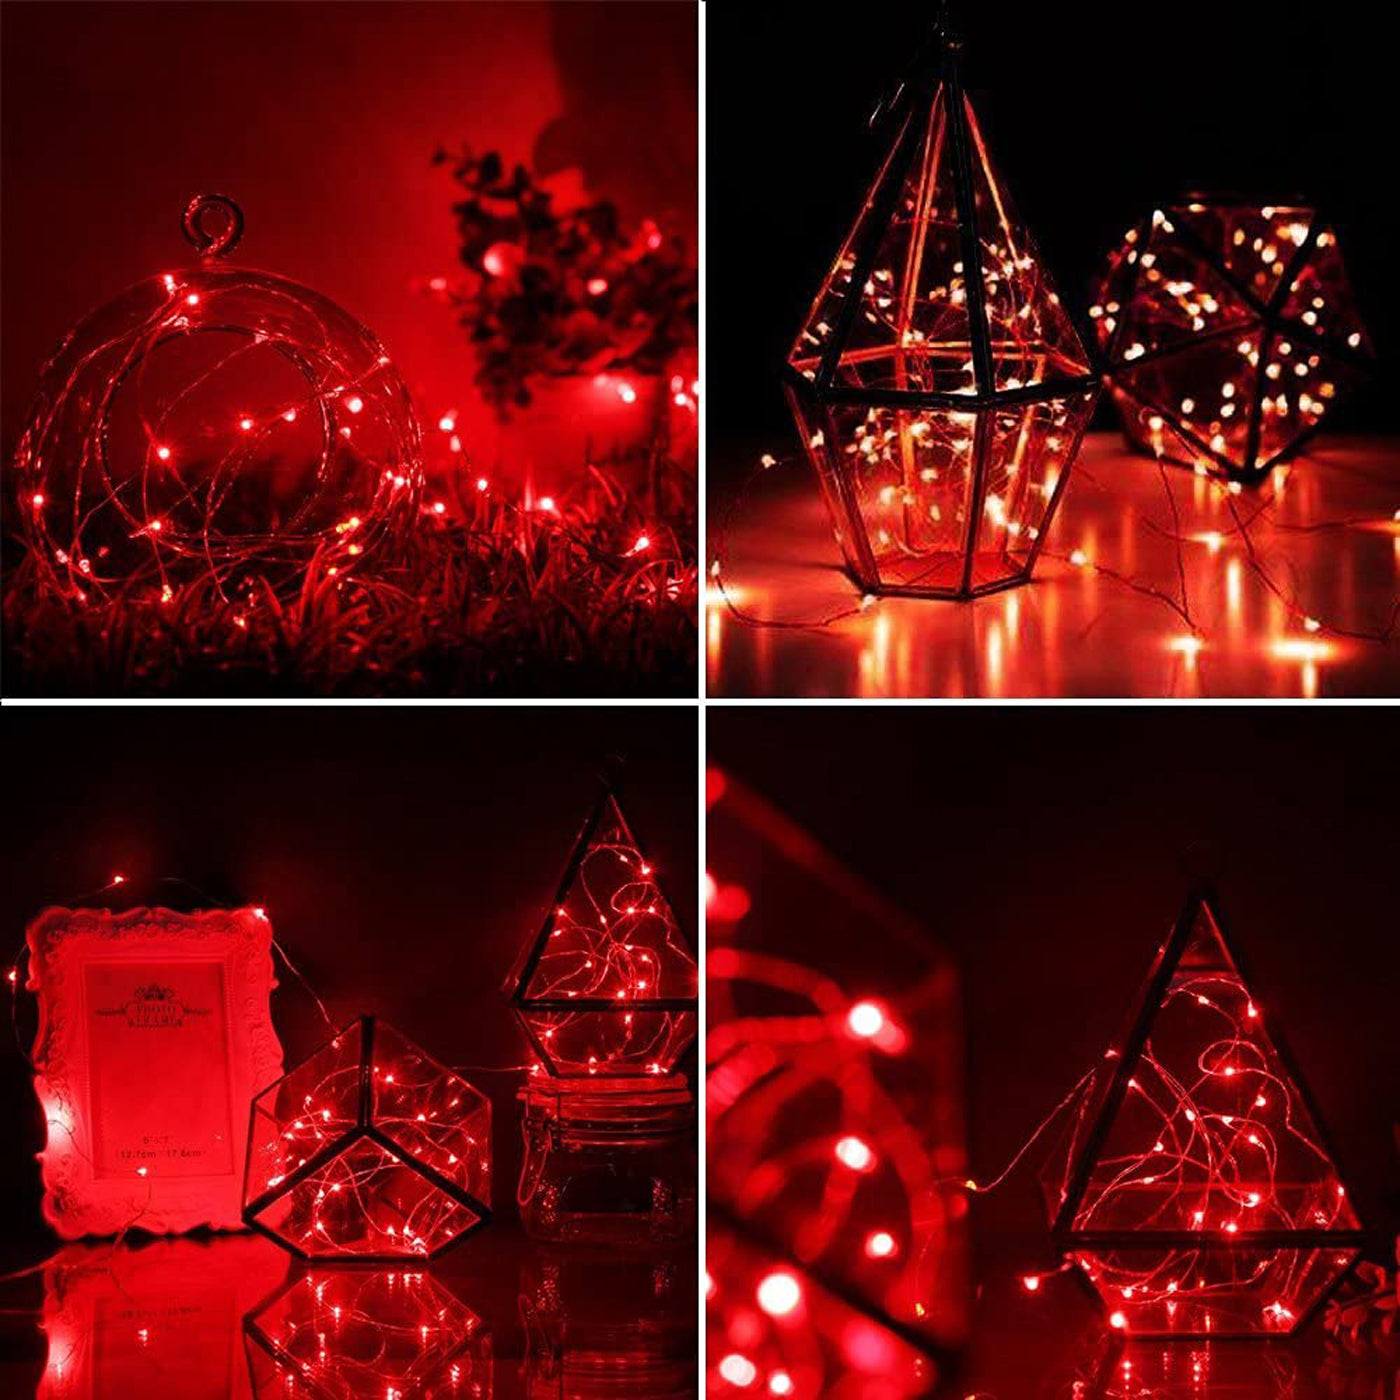 DecorTwist LED String Light for Home and Office Decor| Indoor & Outdoor Decorative Lights|Christmas |Diwali |Wedding | Christmas | Diwali | Wedding |12 Meter Length |(Pack of 4) (Red)